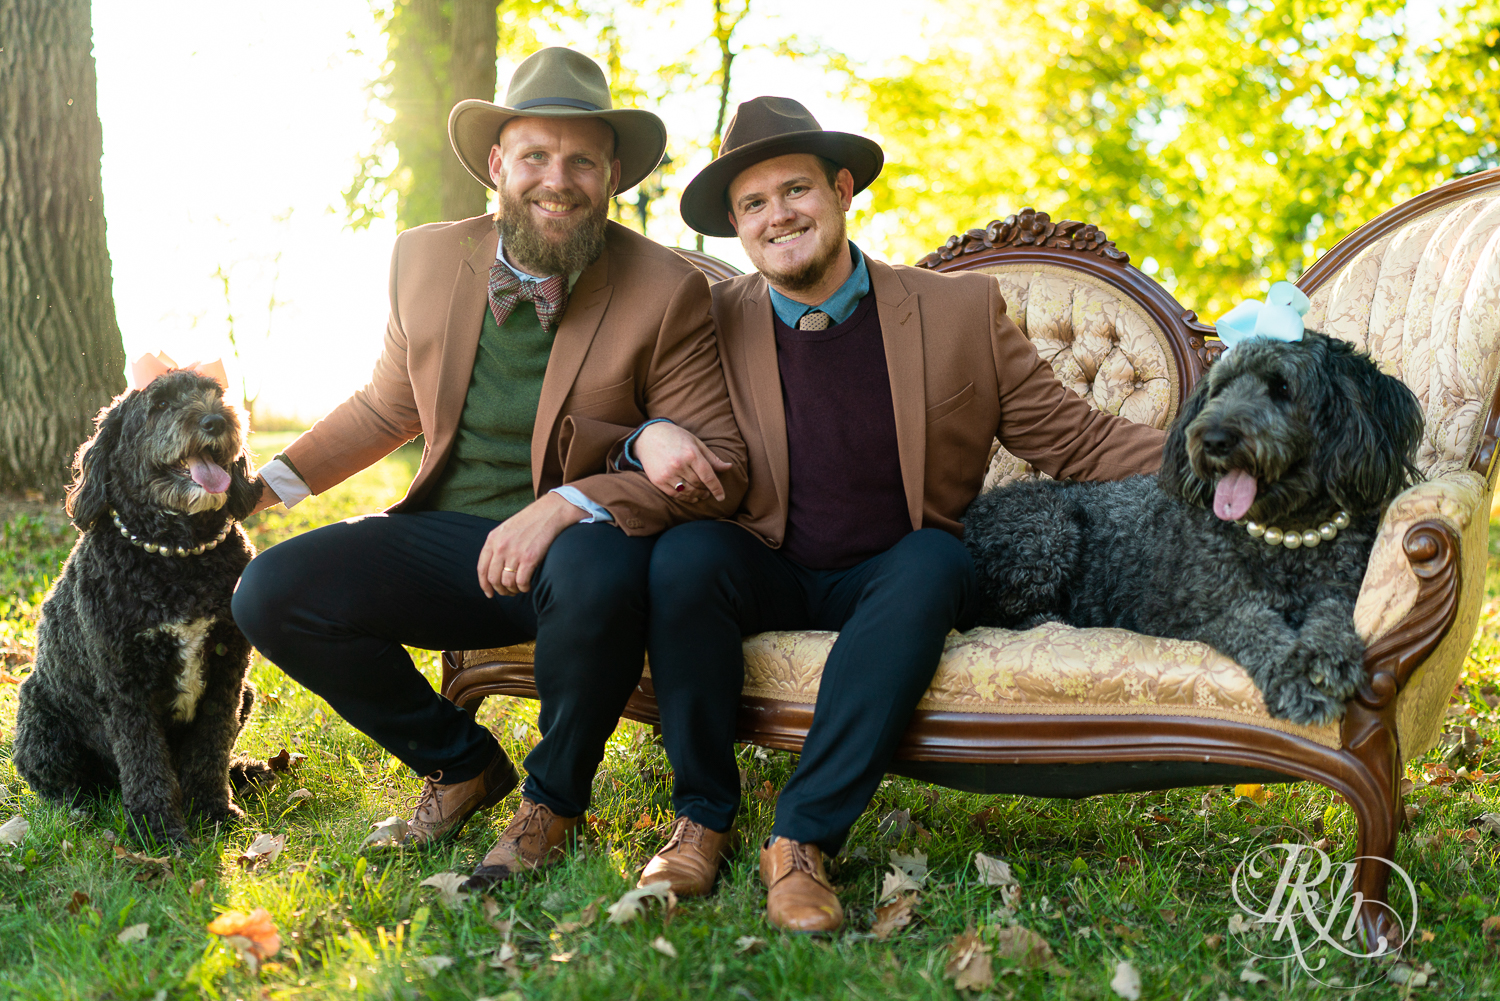 Two gay men smiling in suits and hats with Sheepadoodles in Belle Plaine, Minnesota.